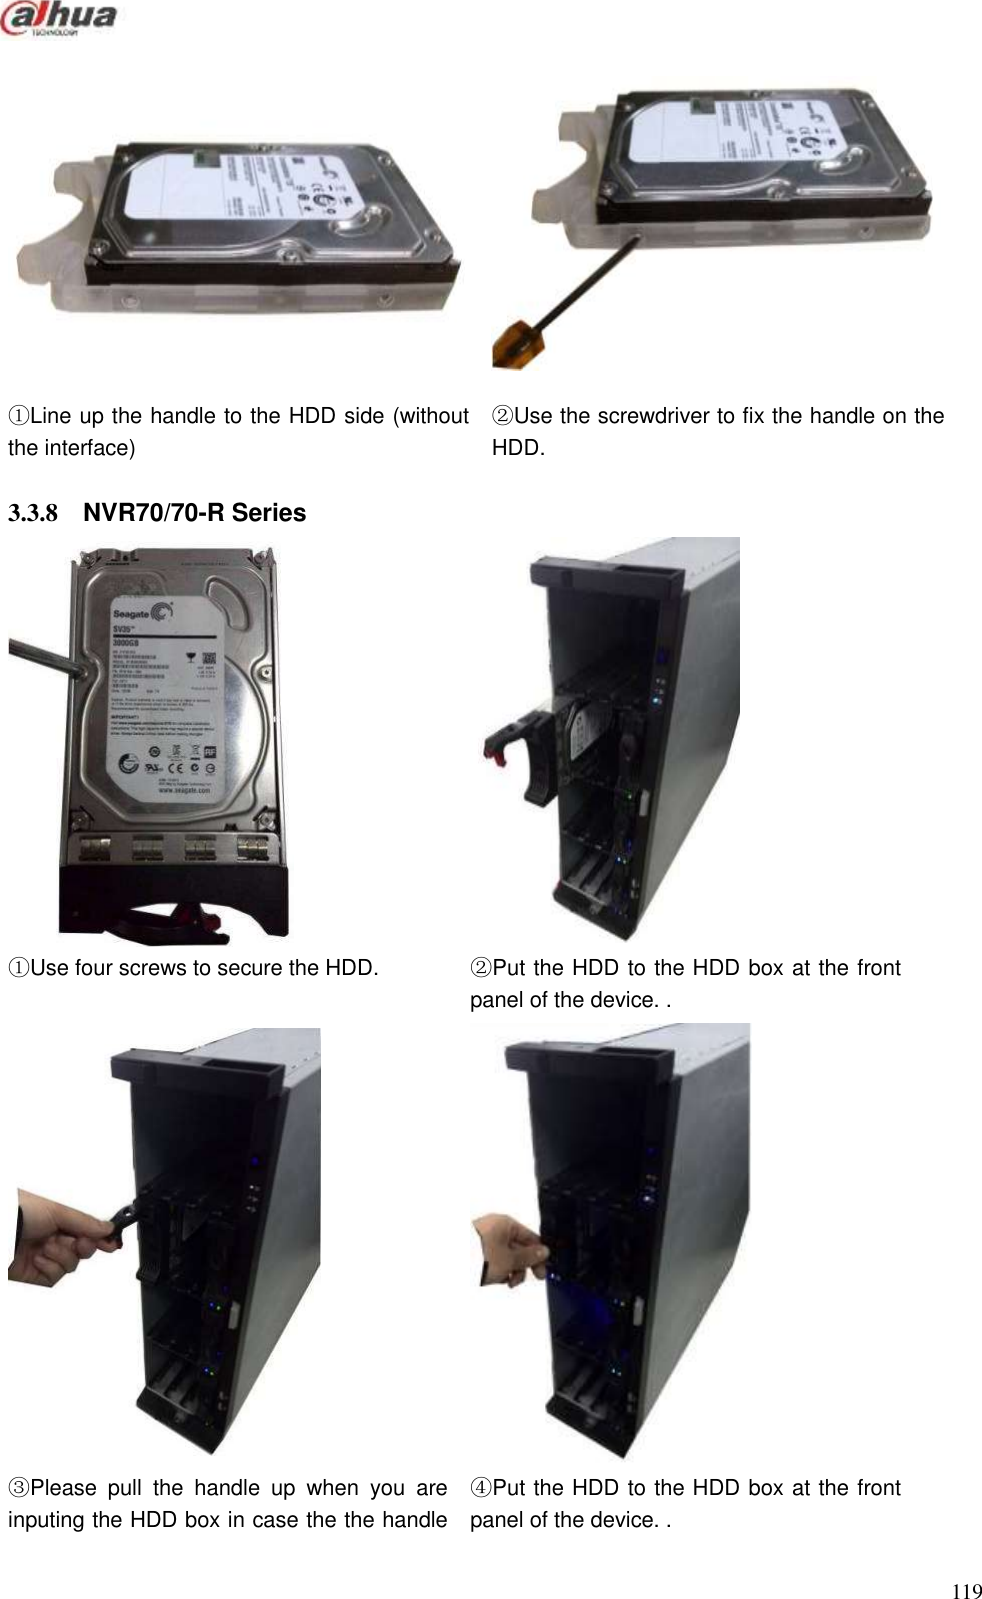  119    ①Line up the handle to the HDD side (without the interface) ②Use the screwdriver to fix the handle on the HDD.  3.3.8  NVR70/70-R Series   ①Use four screws to secure the HDD. ②Put the HDD to the HDD box at the front panel of the device. .   ③Please  pull  the  handle  up  when  you  are inputing the HDD box in case the the handle ④Put the HDD to the HDD box at the front panel of the device. . 